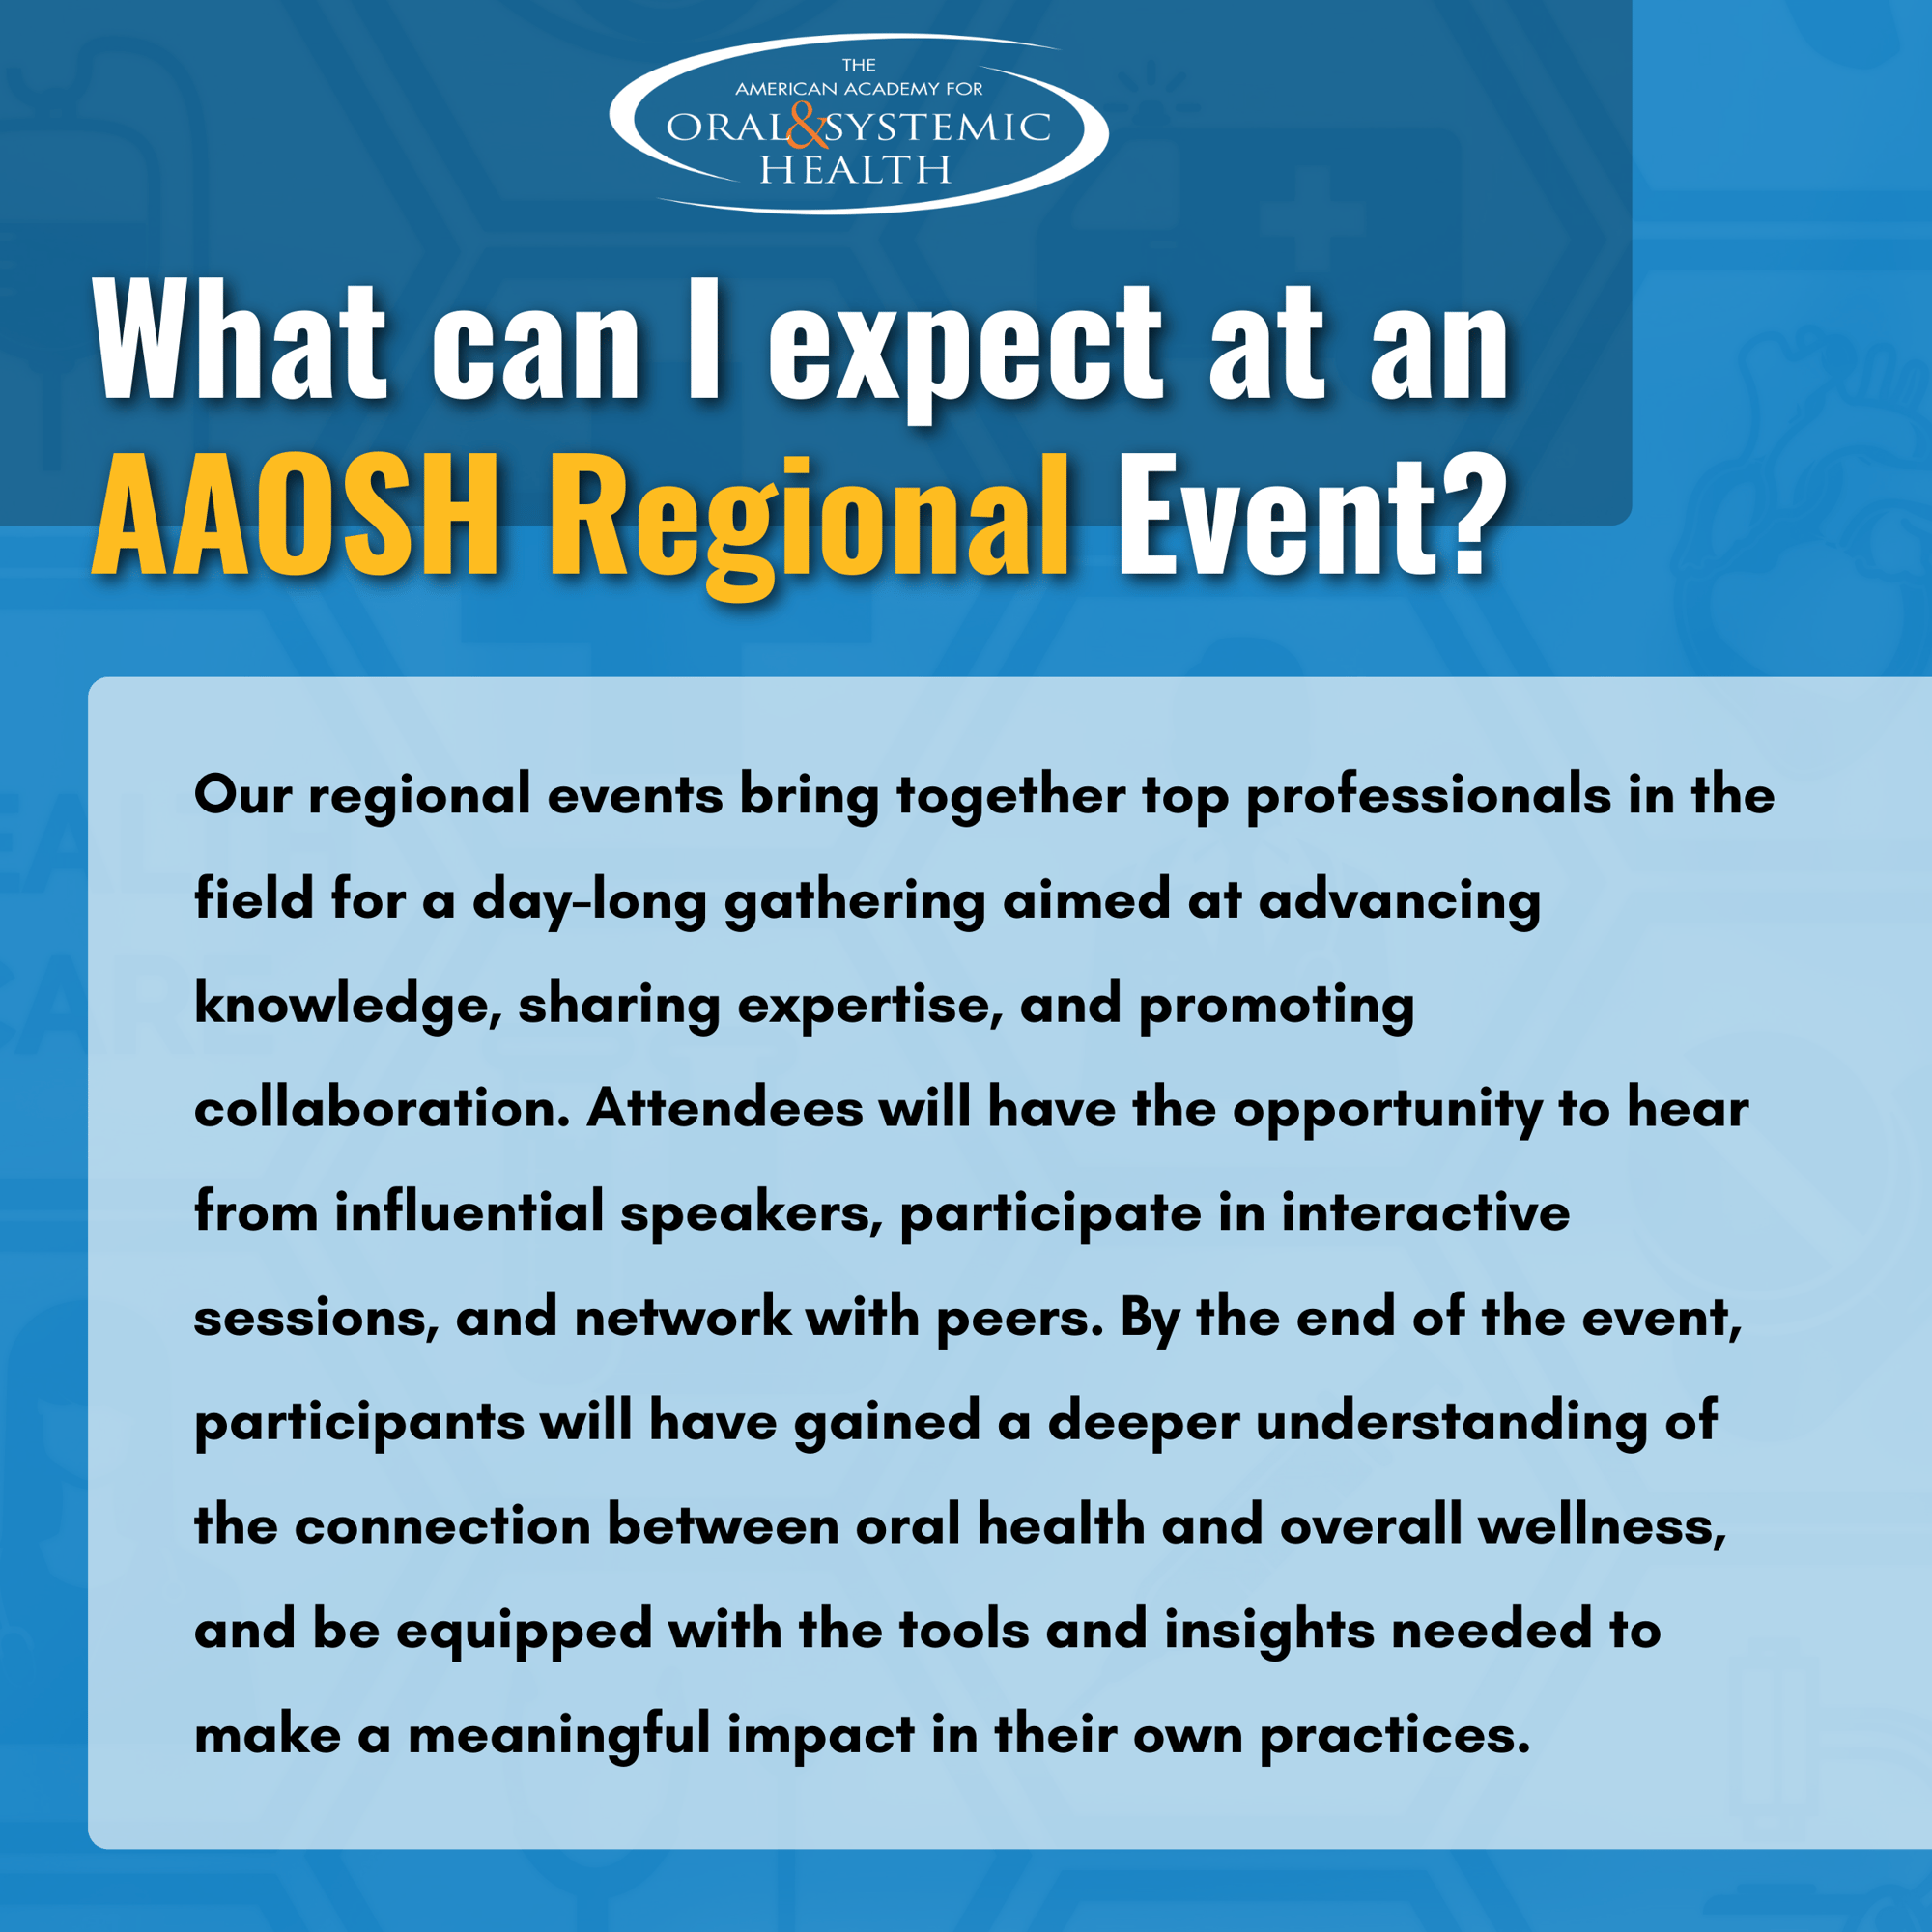 What can I expect at an AAOSH Regional Event? Our regional events bring together top professionals in the field for a day-long gathering aimed at advancing knowledge, sharing expertise, and promoting collaboration. Attendees will have the opportunity to hear from influential speakers, participate in interactive sessions, and network with peers. By the end of the event, participants will have gained a deeper understanding of the connection between oral health and overall wellness, and be equipped with the tools and insights needed to make a meaningful impact in their own practices. 